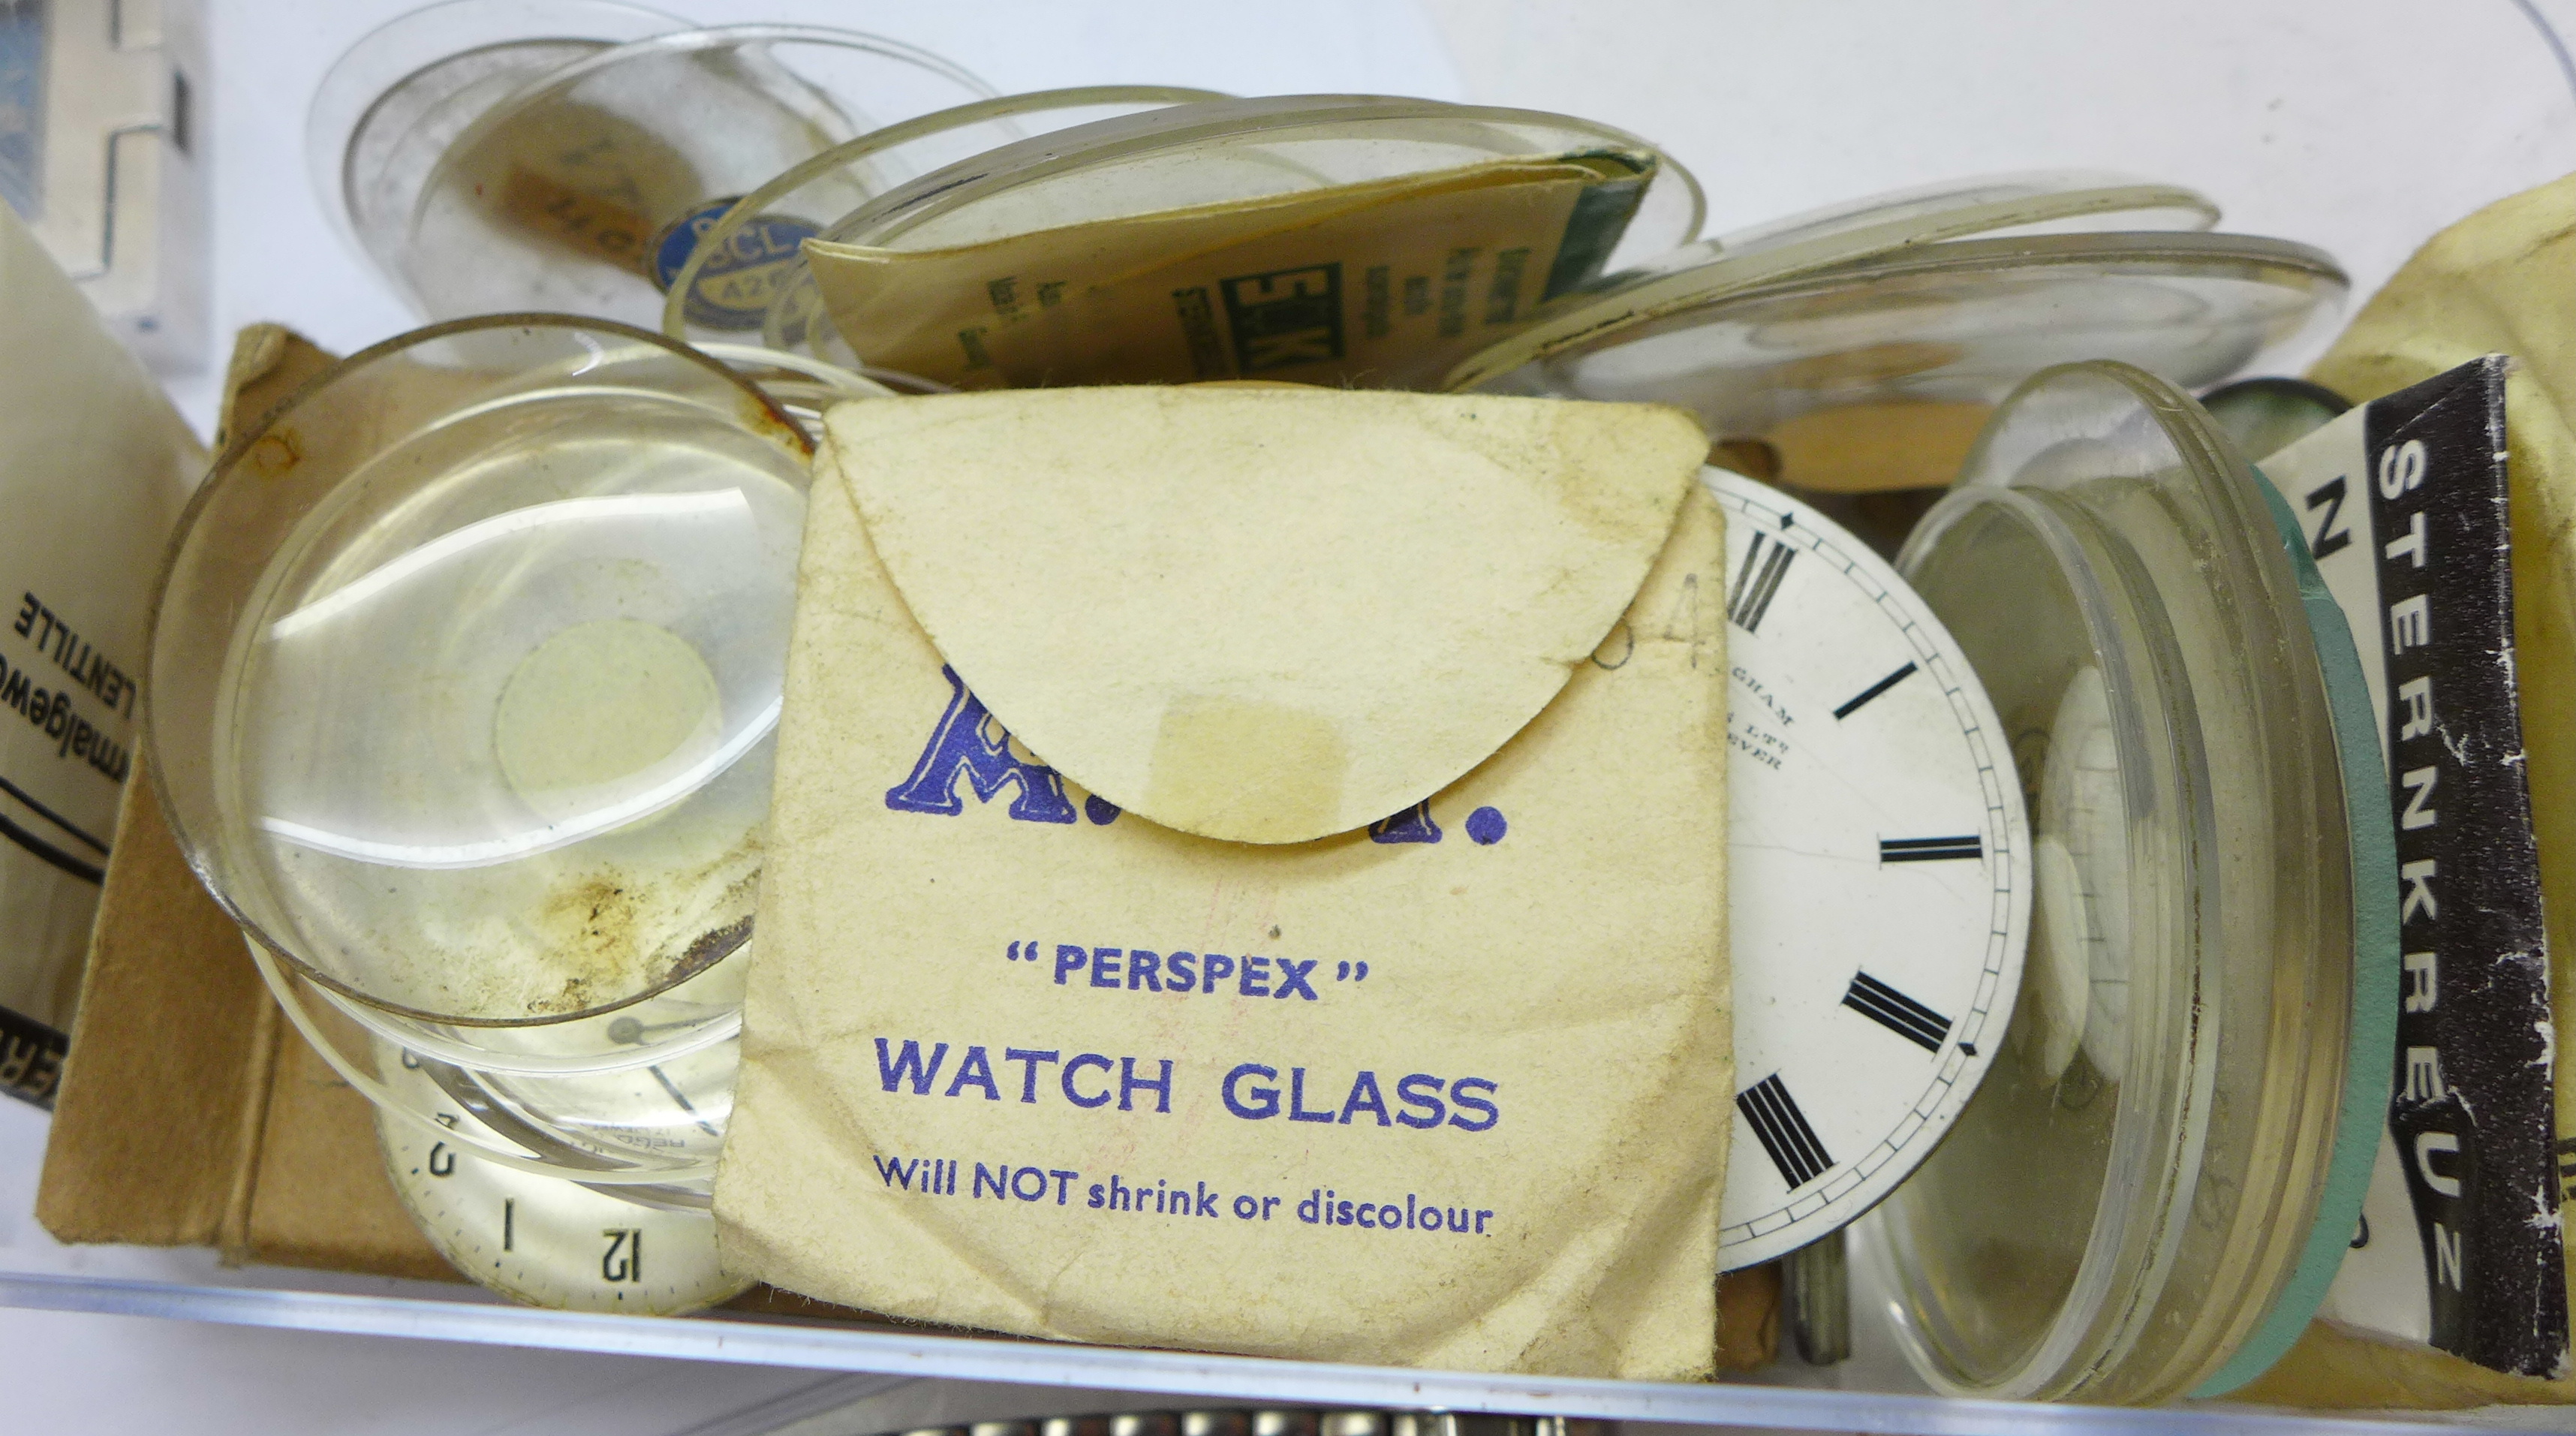 Wristwatches including Seiko and Accurist, watch glasses, etc. - Image 8 of 8